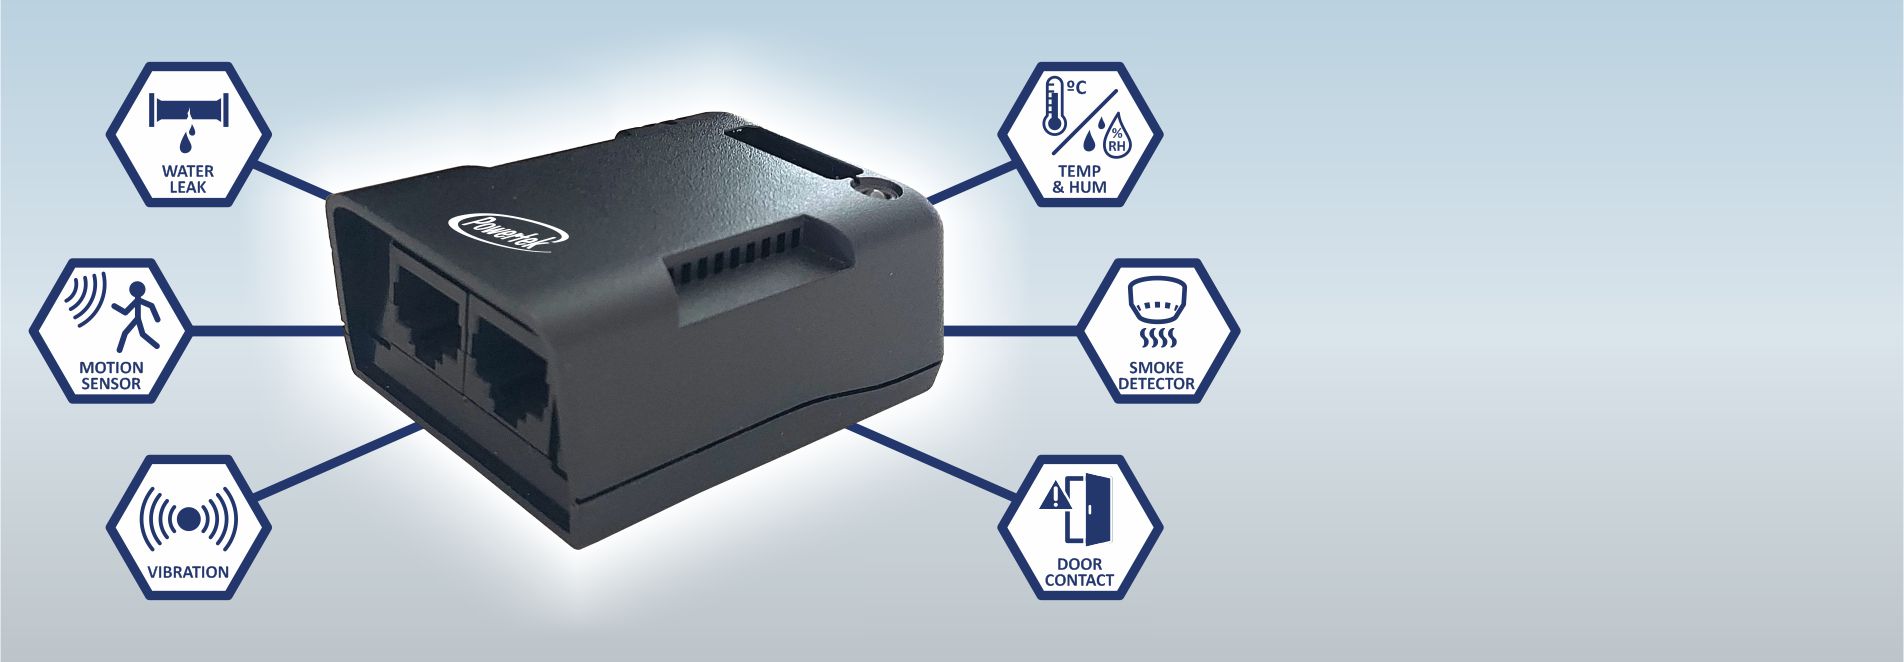 Environmental monitoring all in one flexible solution